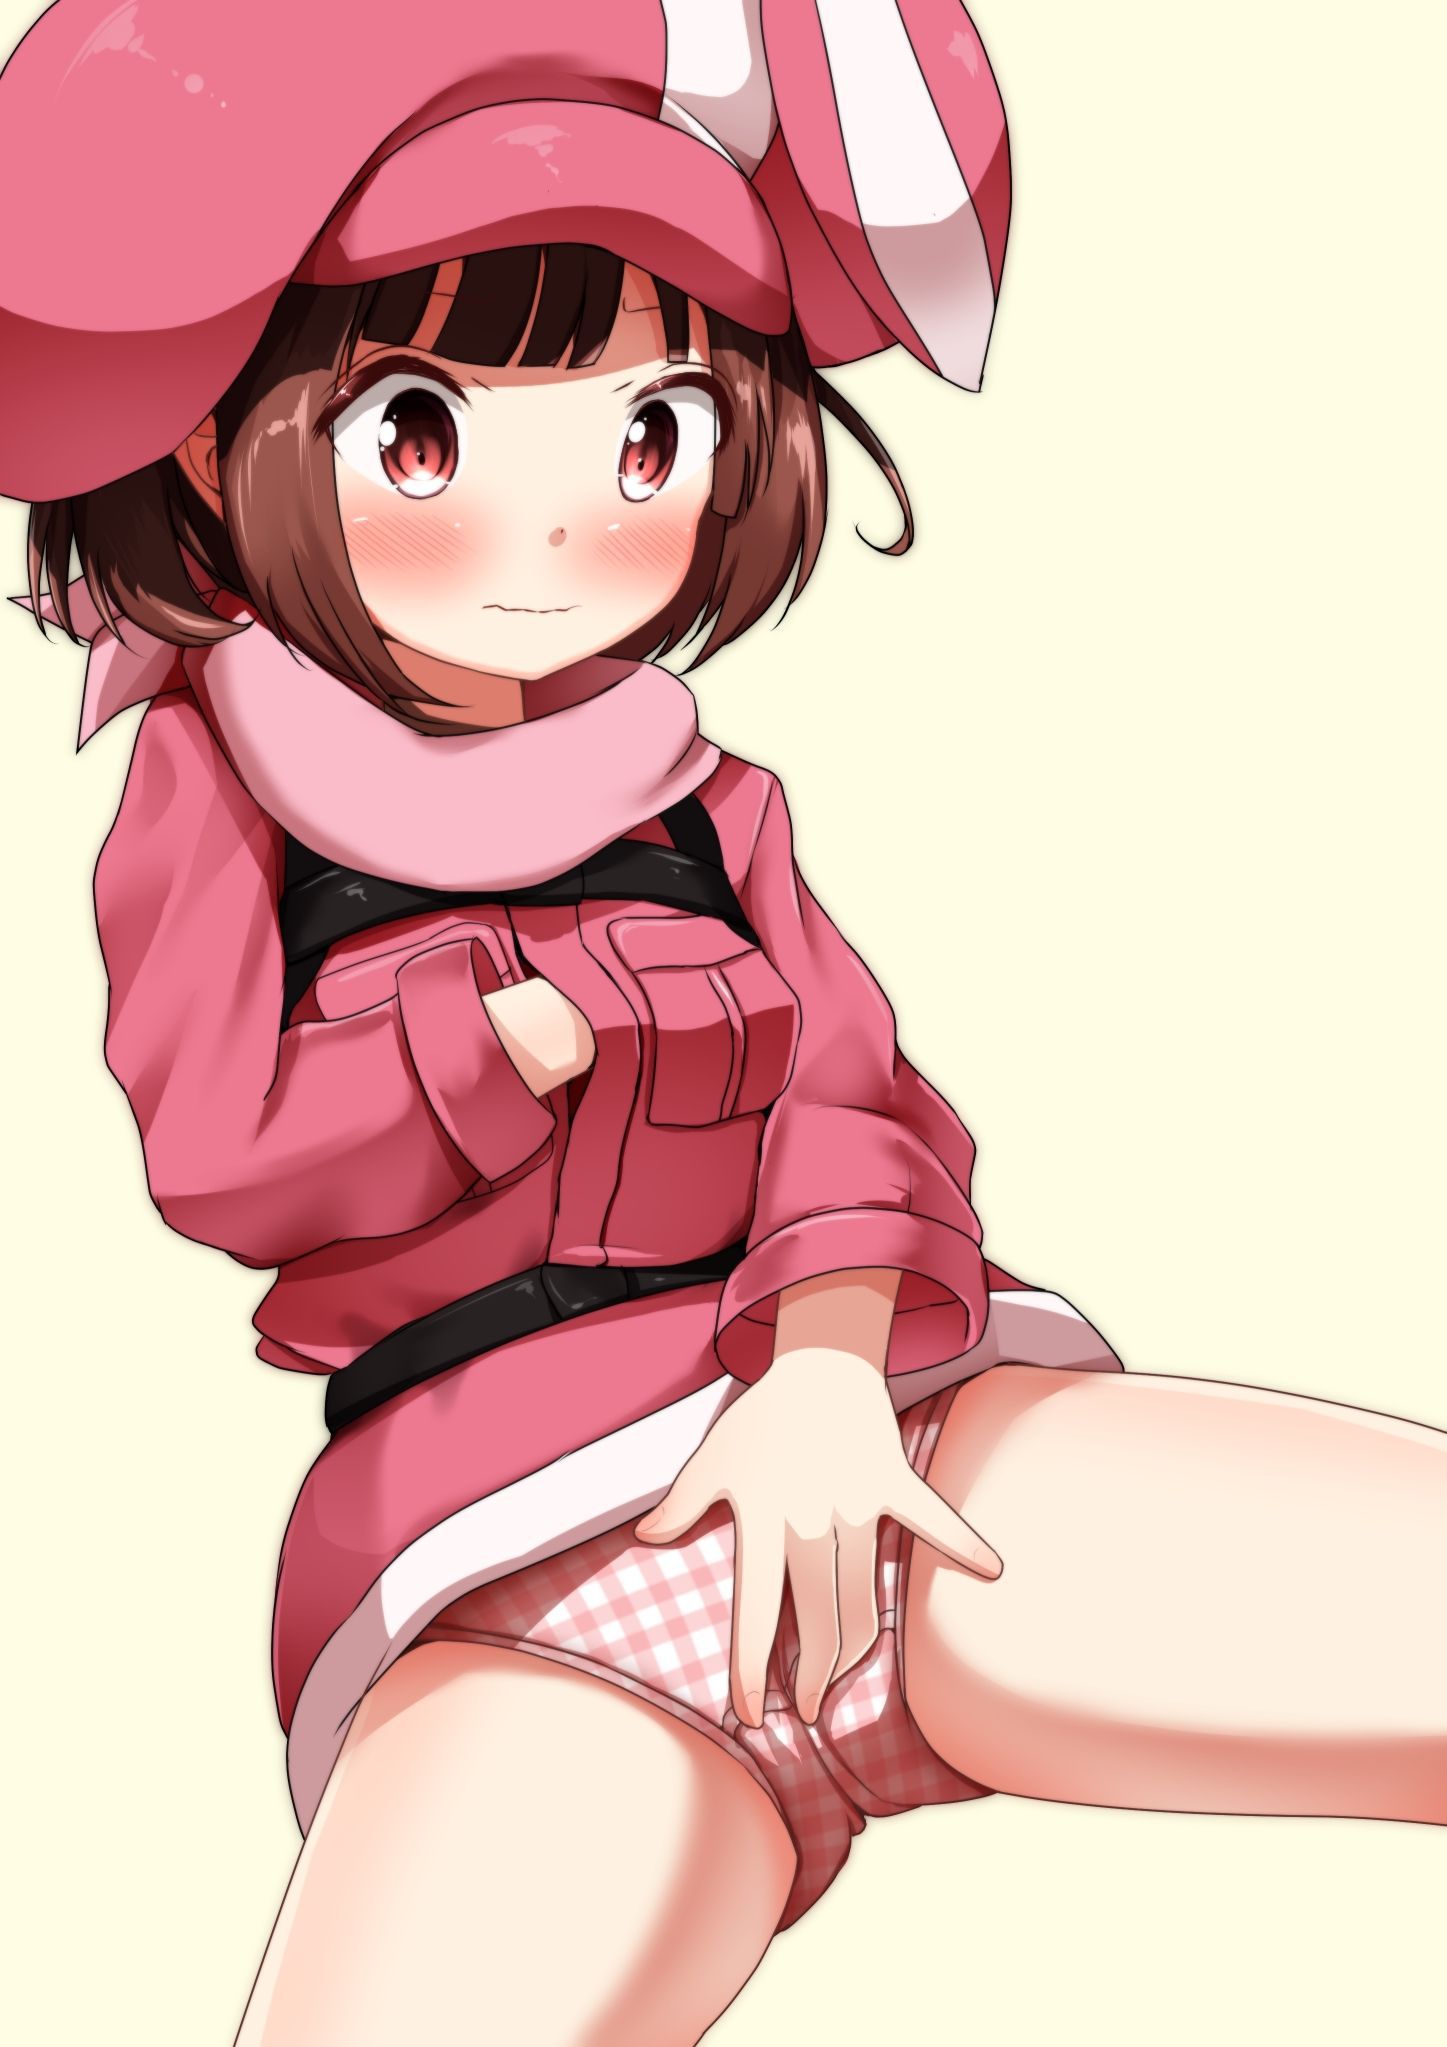 Two-dimensional erotic image that I want to look at loli pants of insanely cute little girls 2